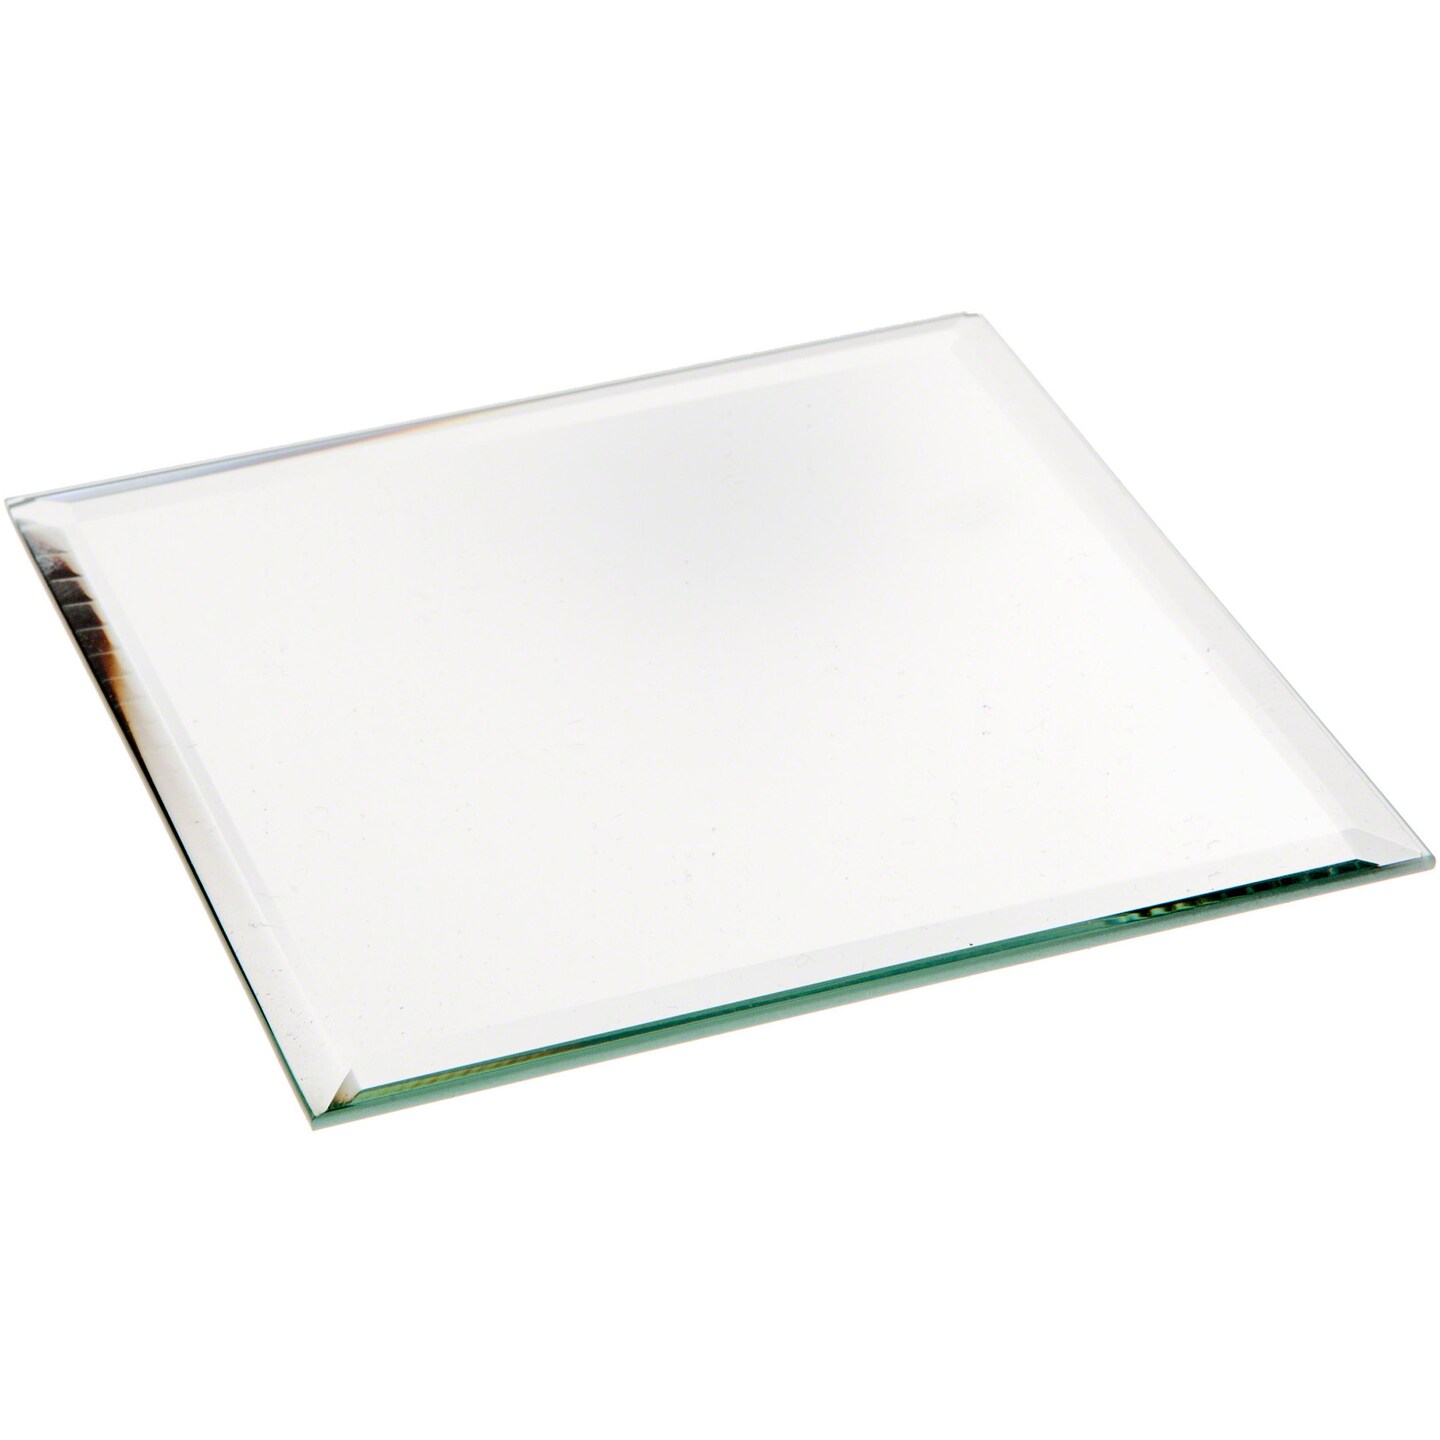 Plymor Square 3mm Beveled Glass Mirror, 4 inch x 4 inch